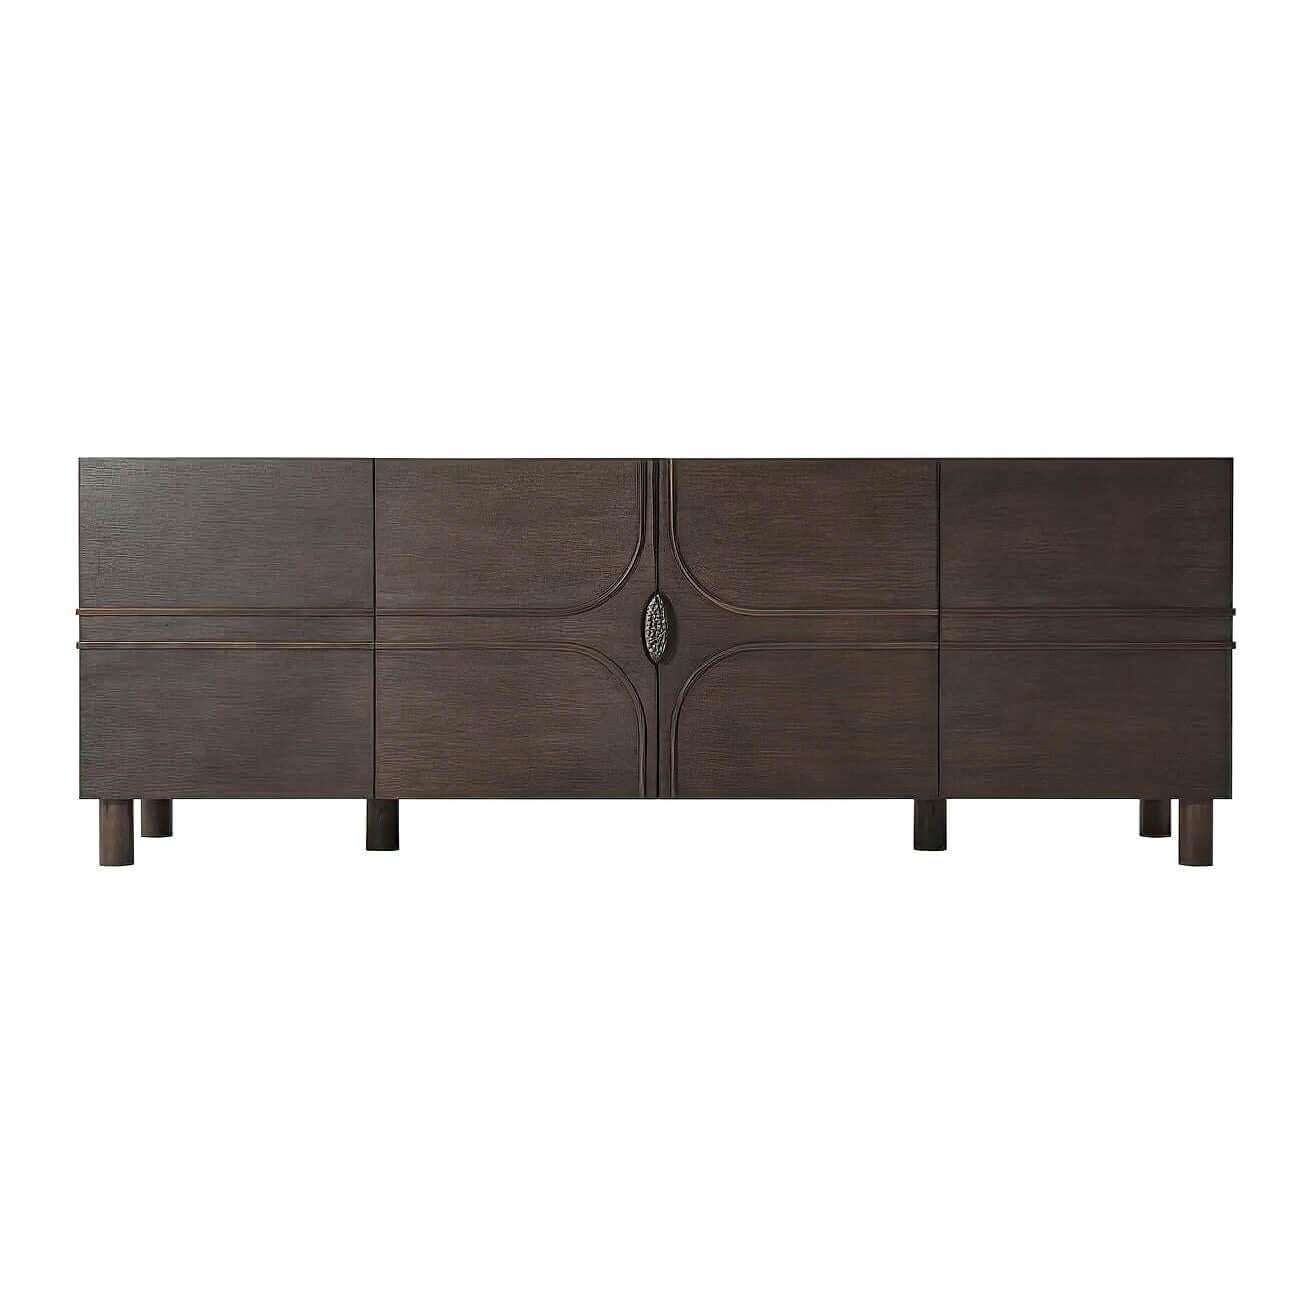 Modern oak veneered four-door brass bound sideboard buffet cabinet with bronze chiseled organic handle and raised on turned oak cylinder legs. The interior three sections with adjustable shelves.
Dimensions: 84